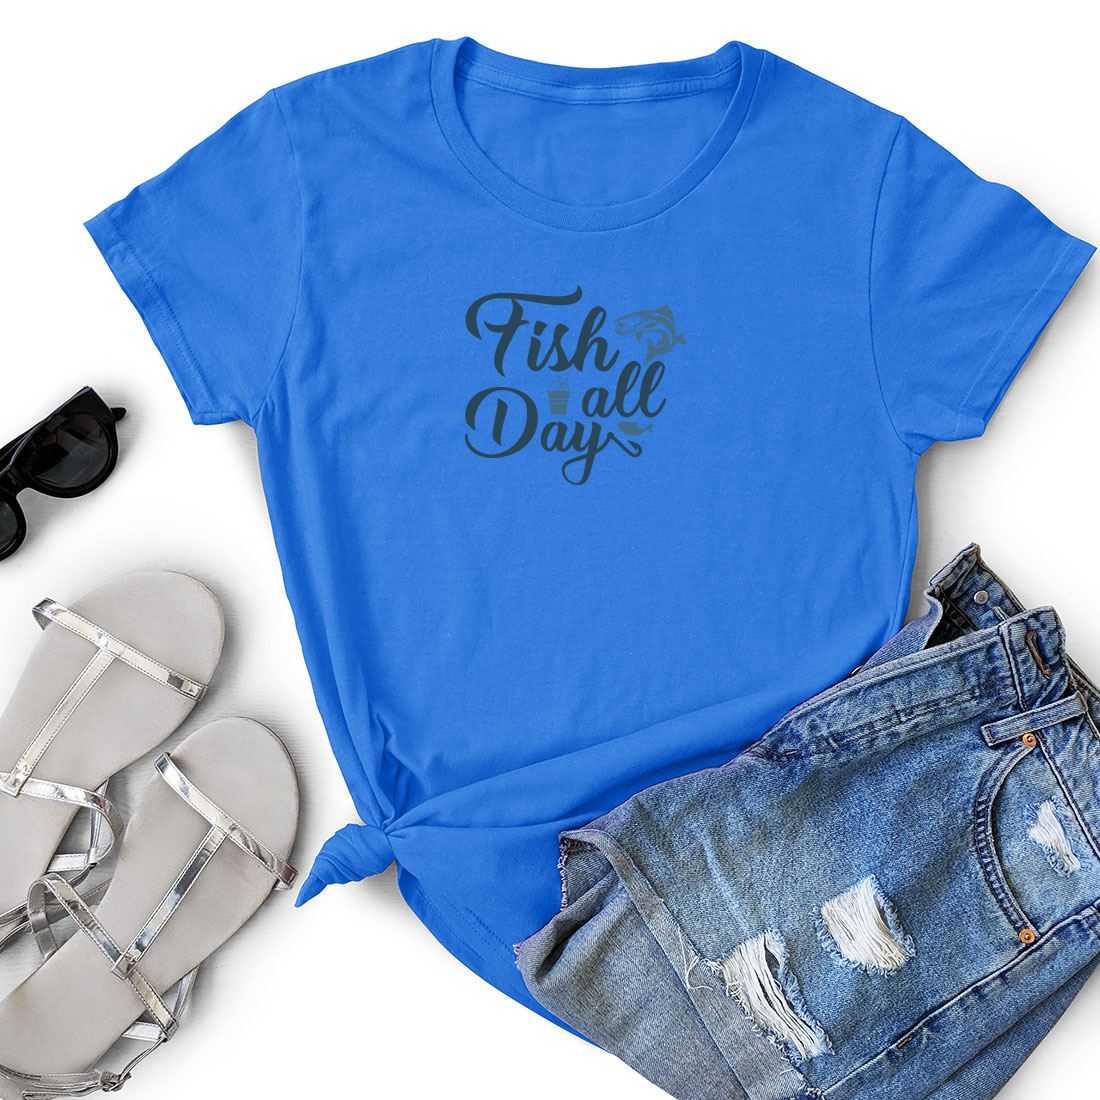 T - shirt that says fish all day next to a pair of shorts.